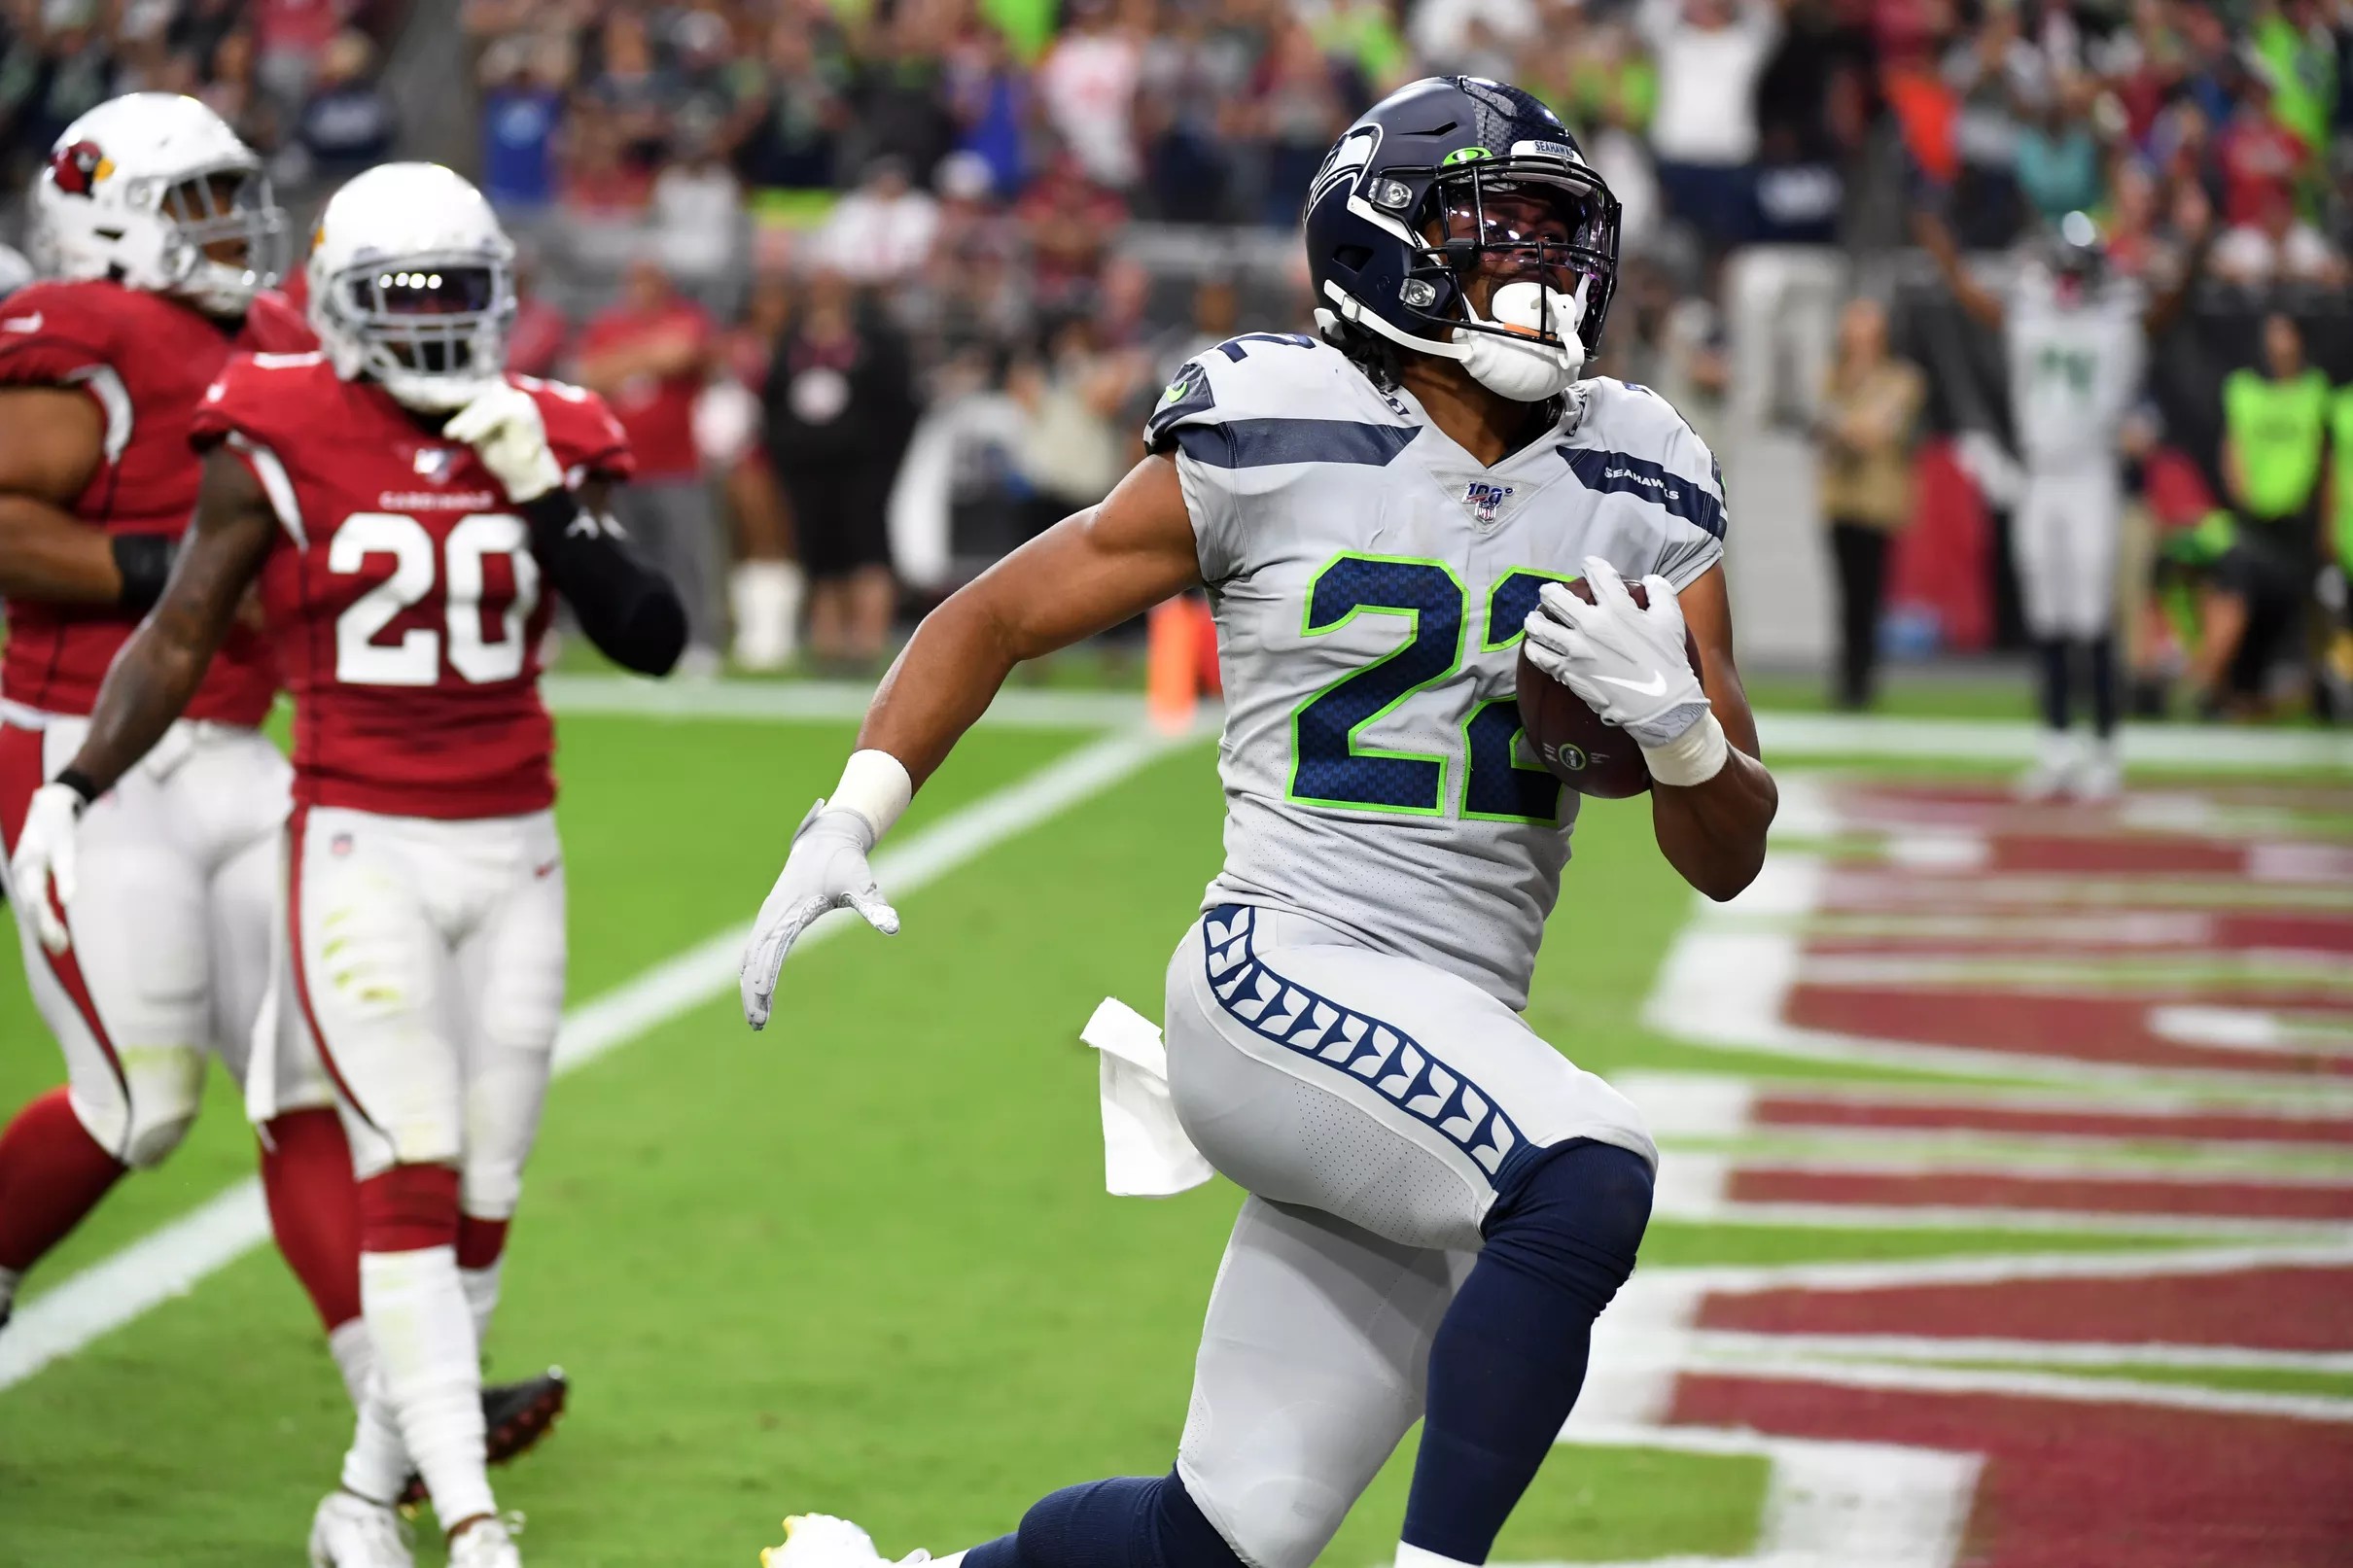 Run Game Review: C.J. Prosise scores against Cardinals